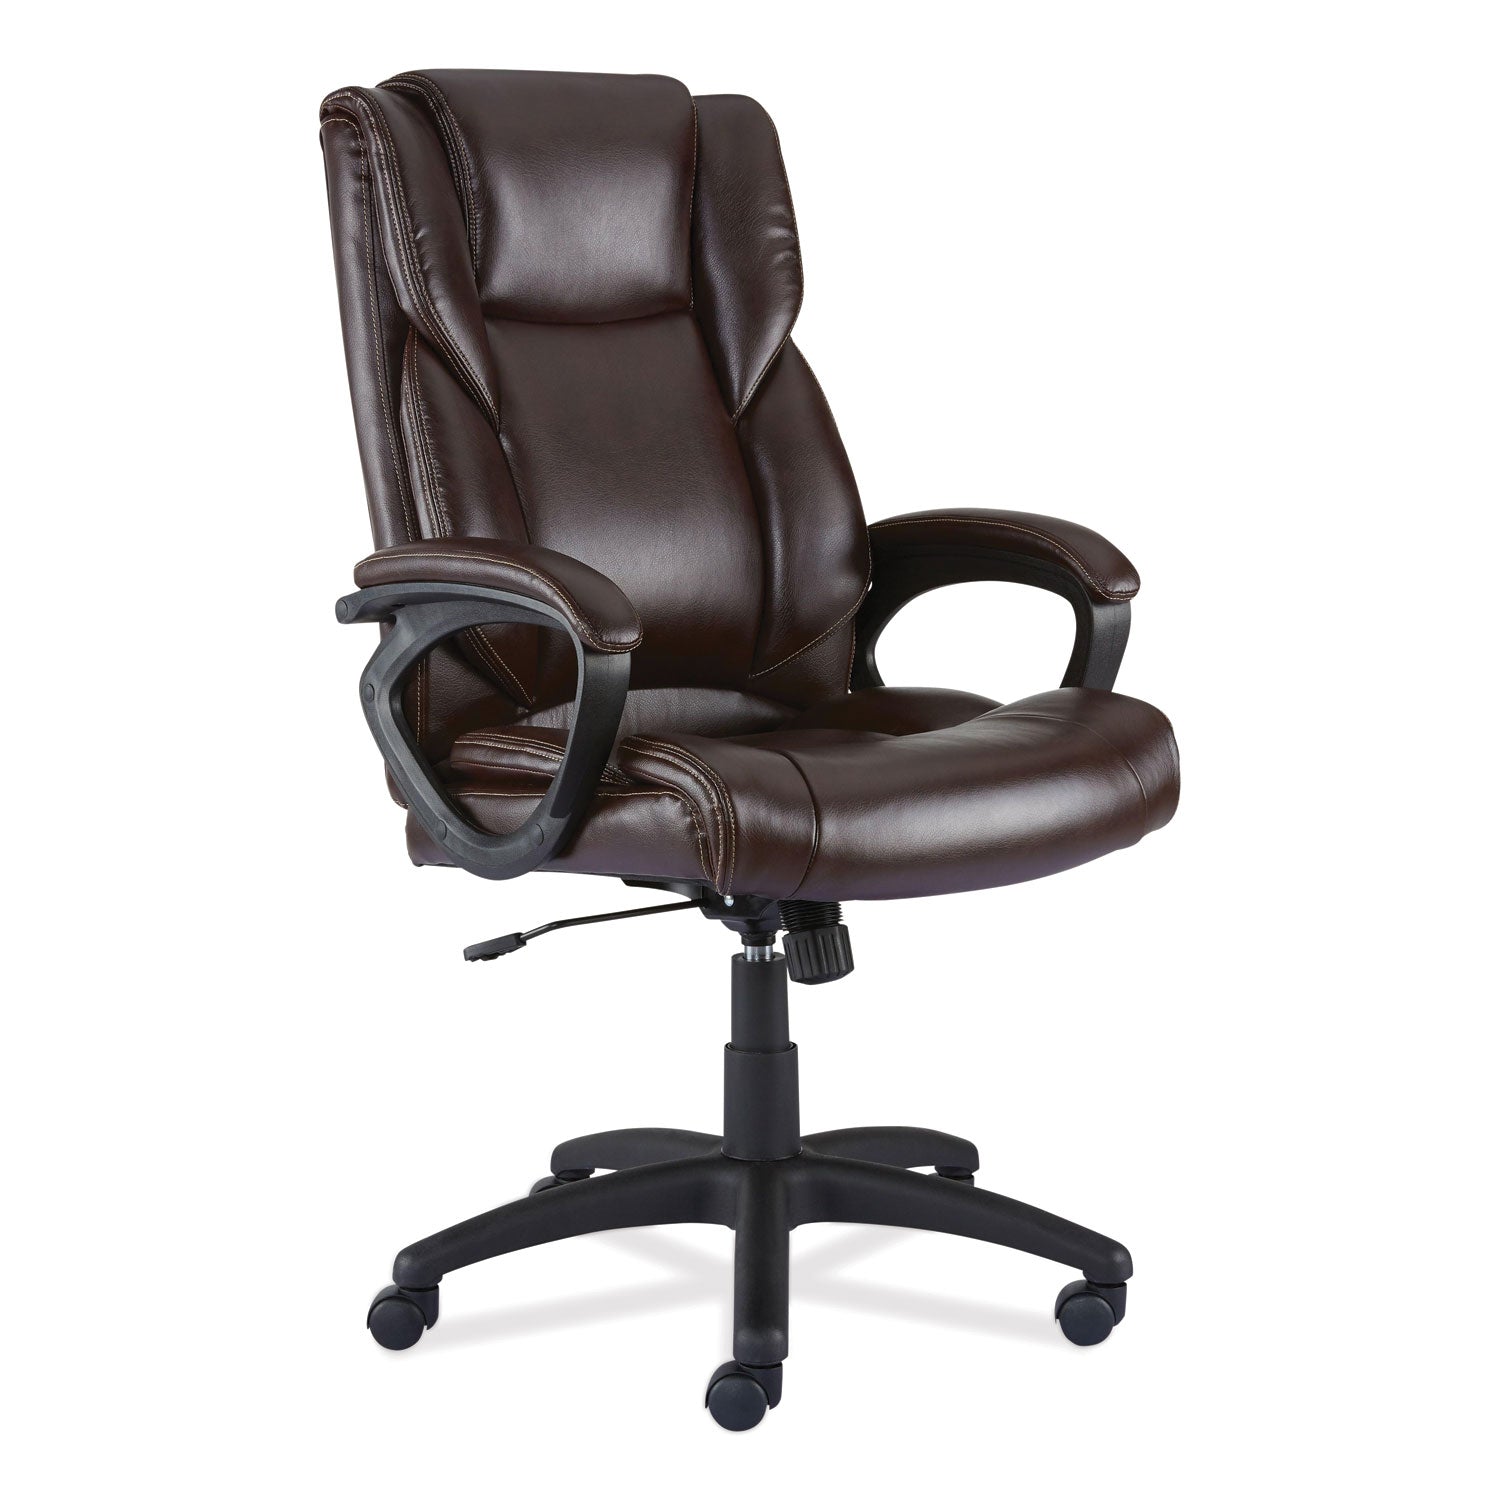 alera-brosna-series-mid-back-task-chair-supports-up-to-250-lb-1815-to-2177-seat-height-brown-seat-back-brown-base_alebrn42b59 - 1